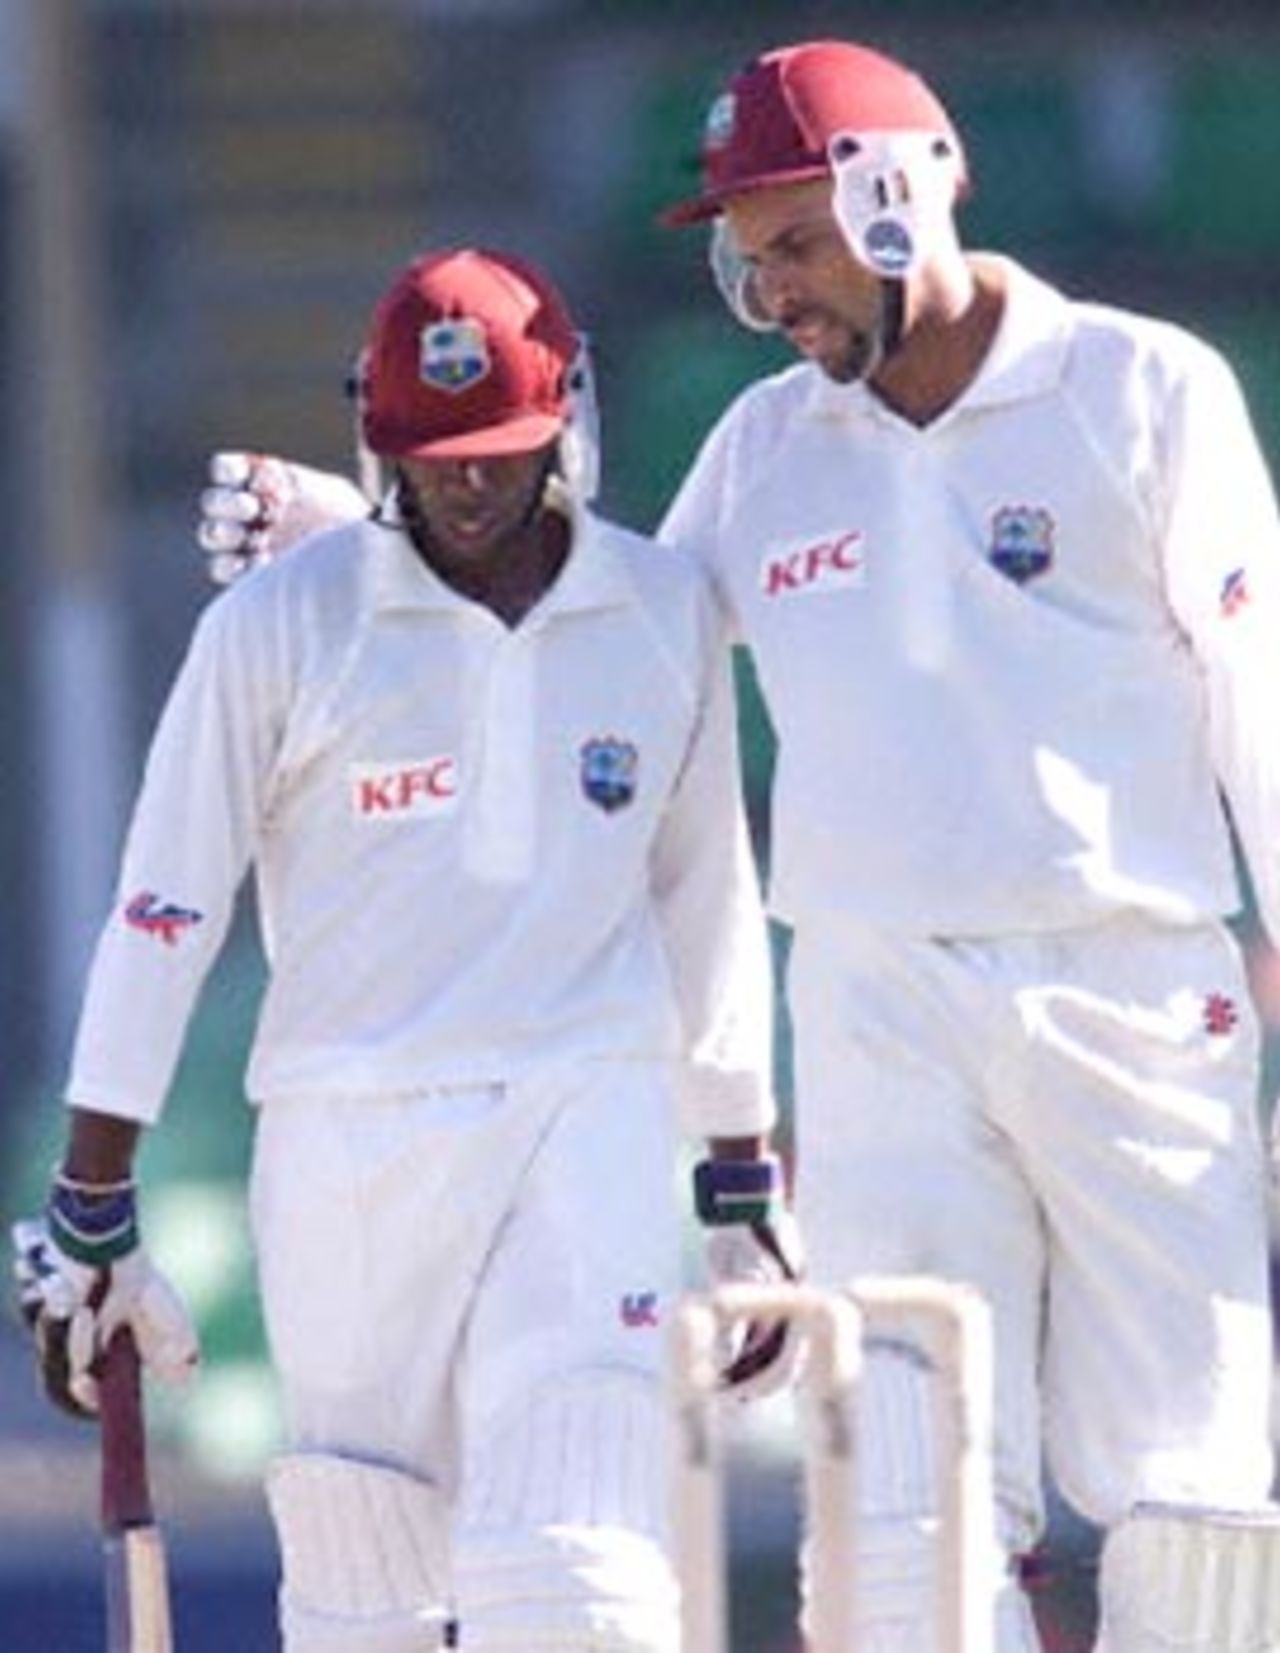 West Indies captain Jimmy Adams (R) congratulates vice-captain Sherwin Campbell (L) on reaching his 100 during a four day match against the Western Warriors at the WACA ground in Perth 11 November 2000. Campbell was eventually out for 119 and at stumps on day three, the West Indies are 6-266 with Adams not out on 41.